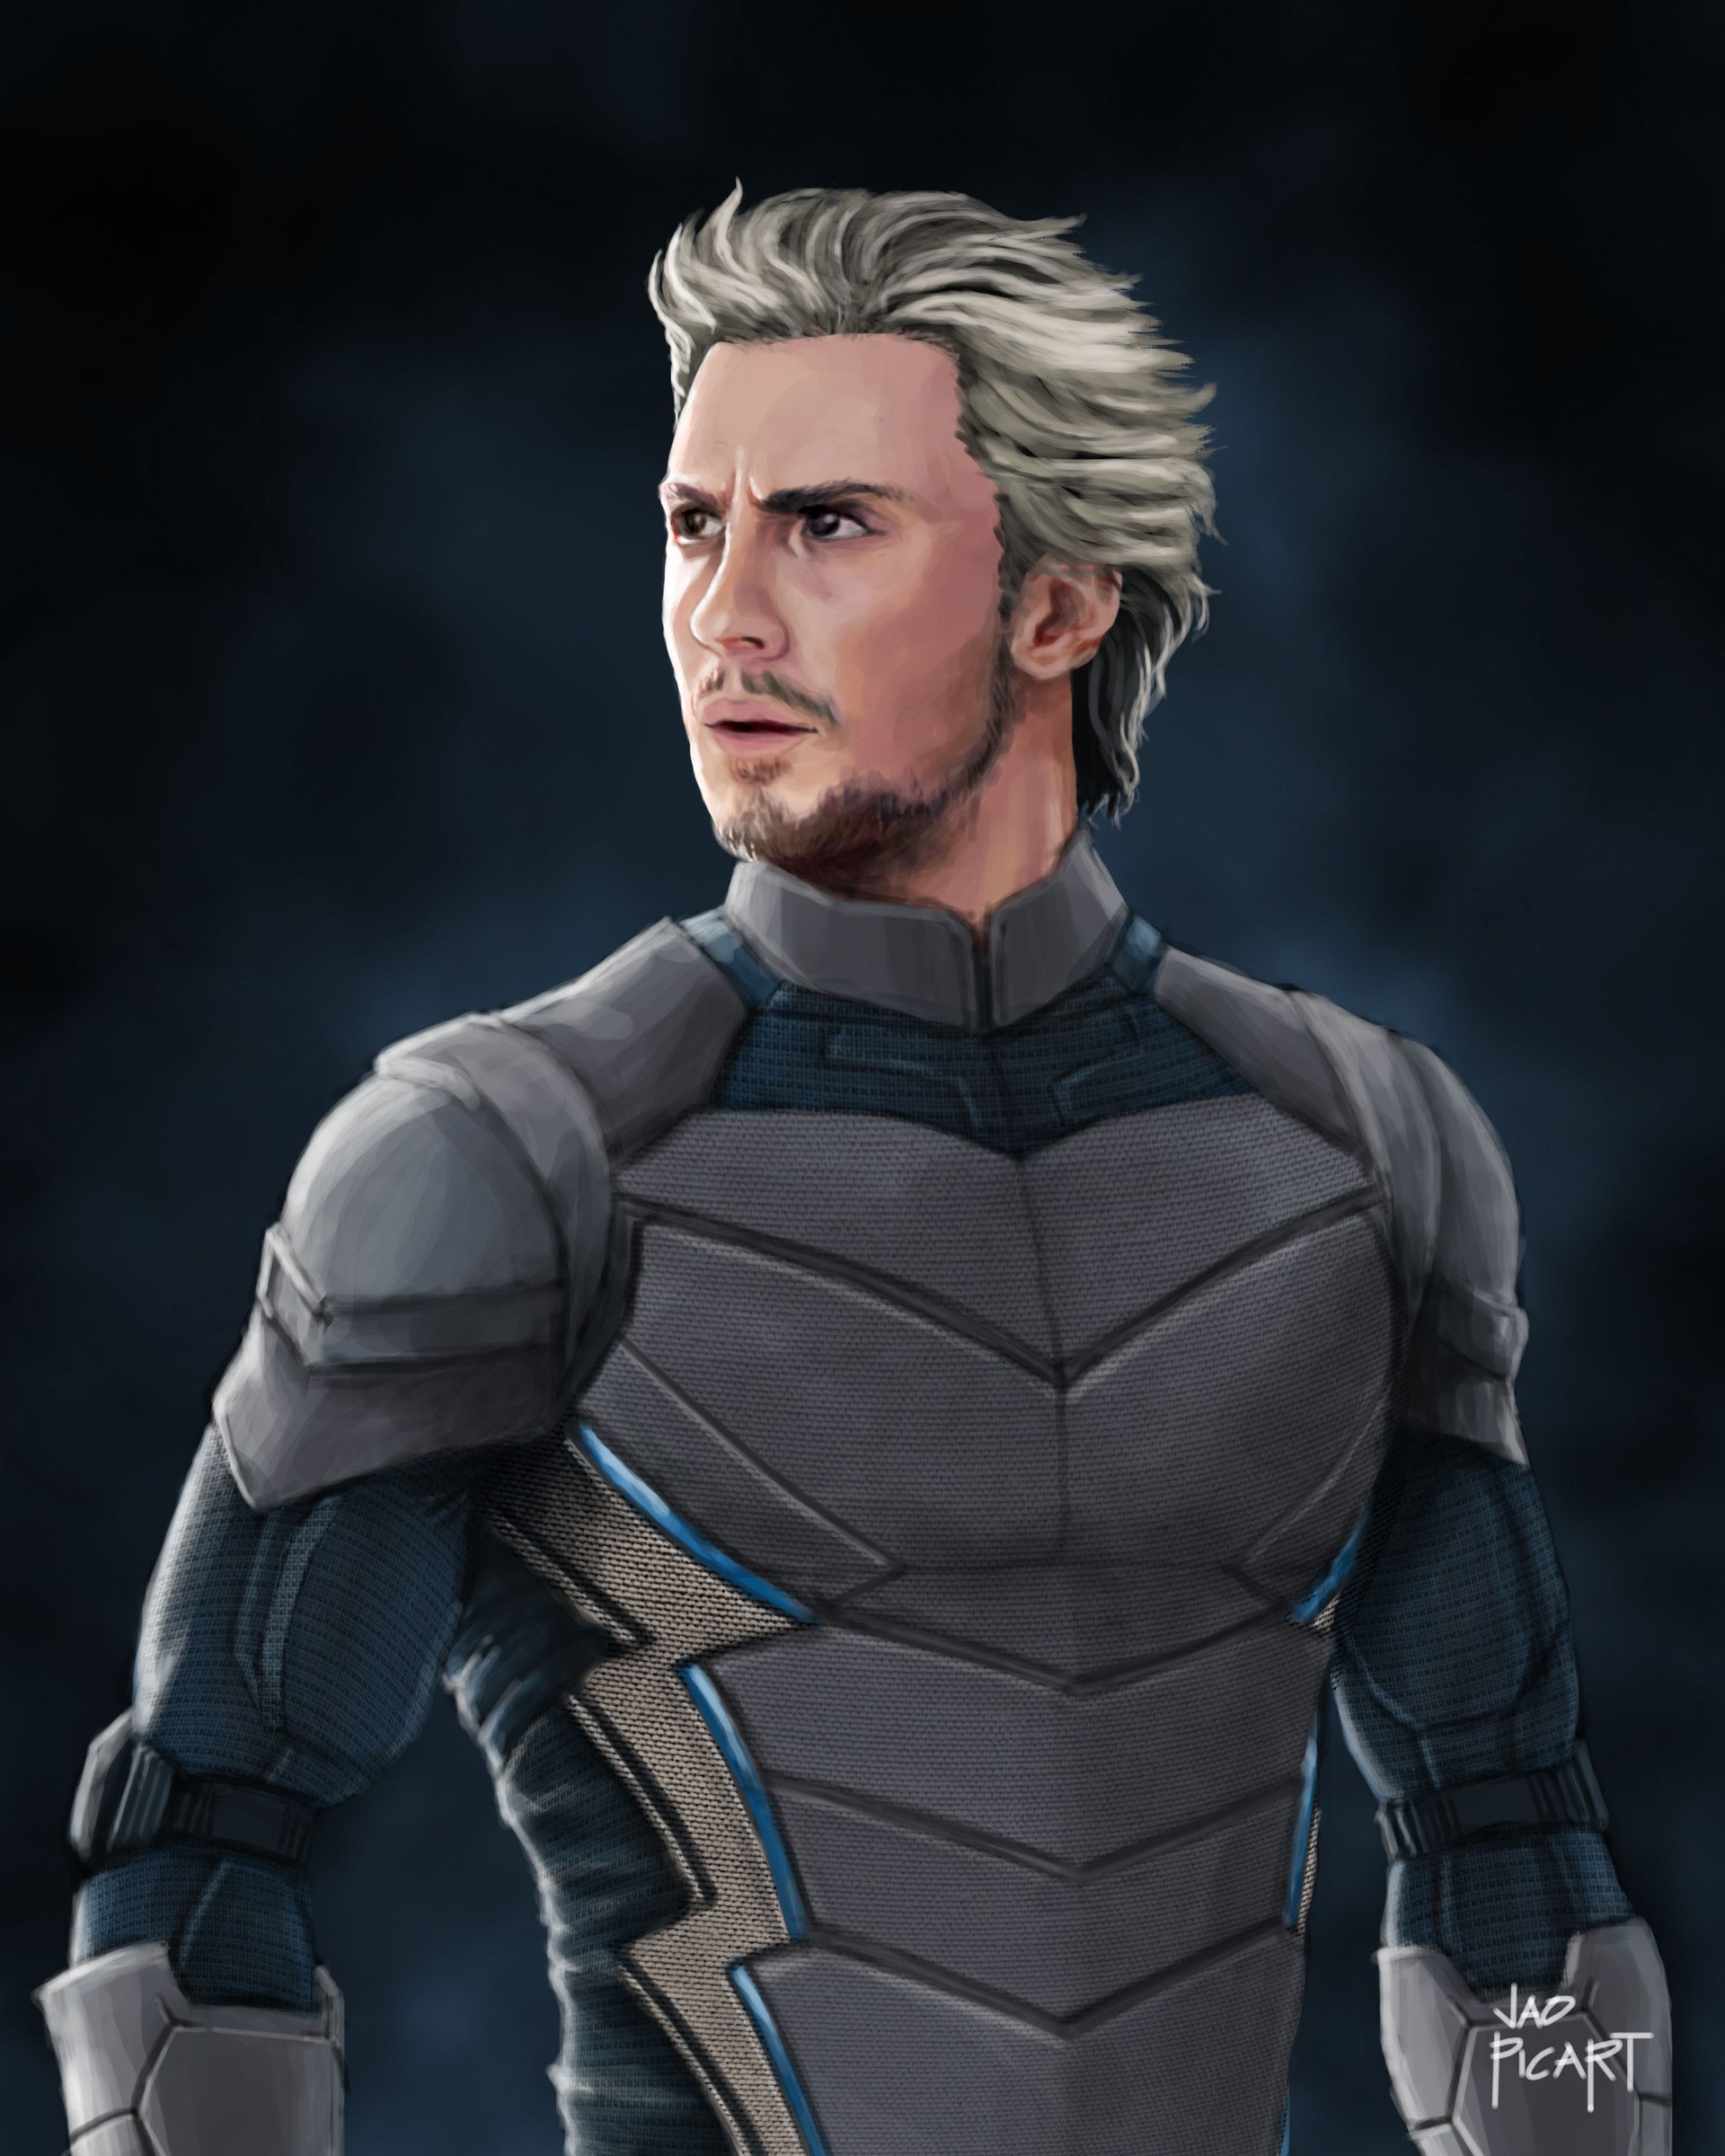 This is just a simple redesign of Quicksilver for the Marvel Cinematic Universe, just in case they br. Marvel superheroes, Quicksilver marvel, Speedster superhero